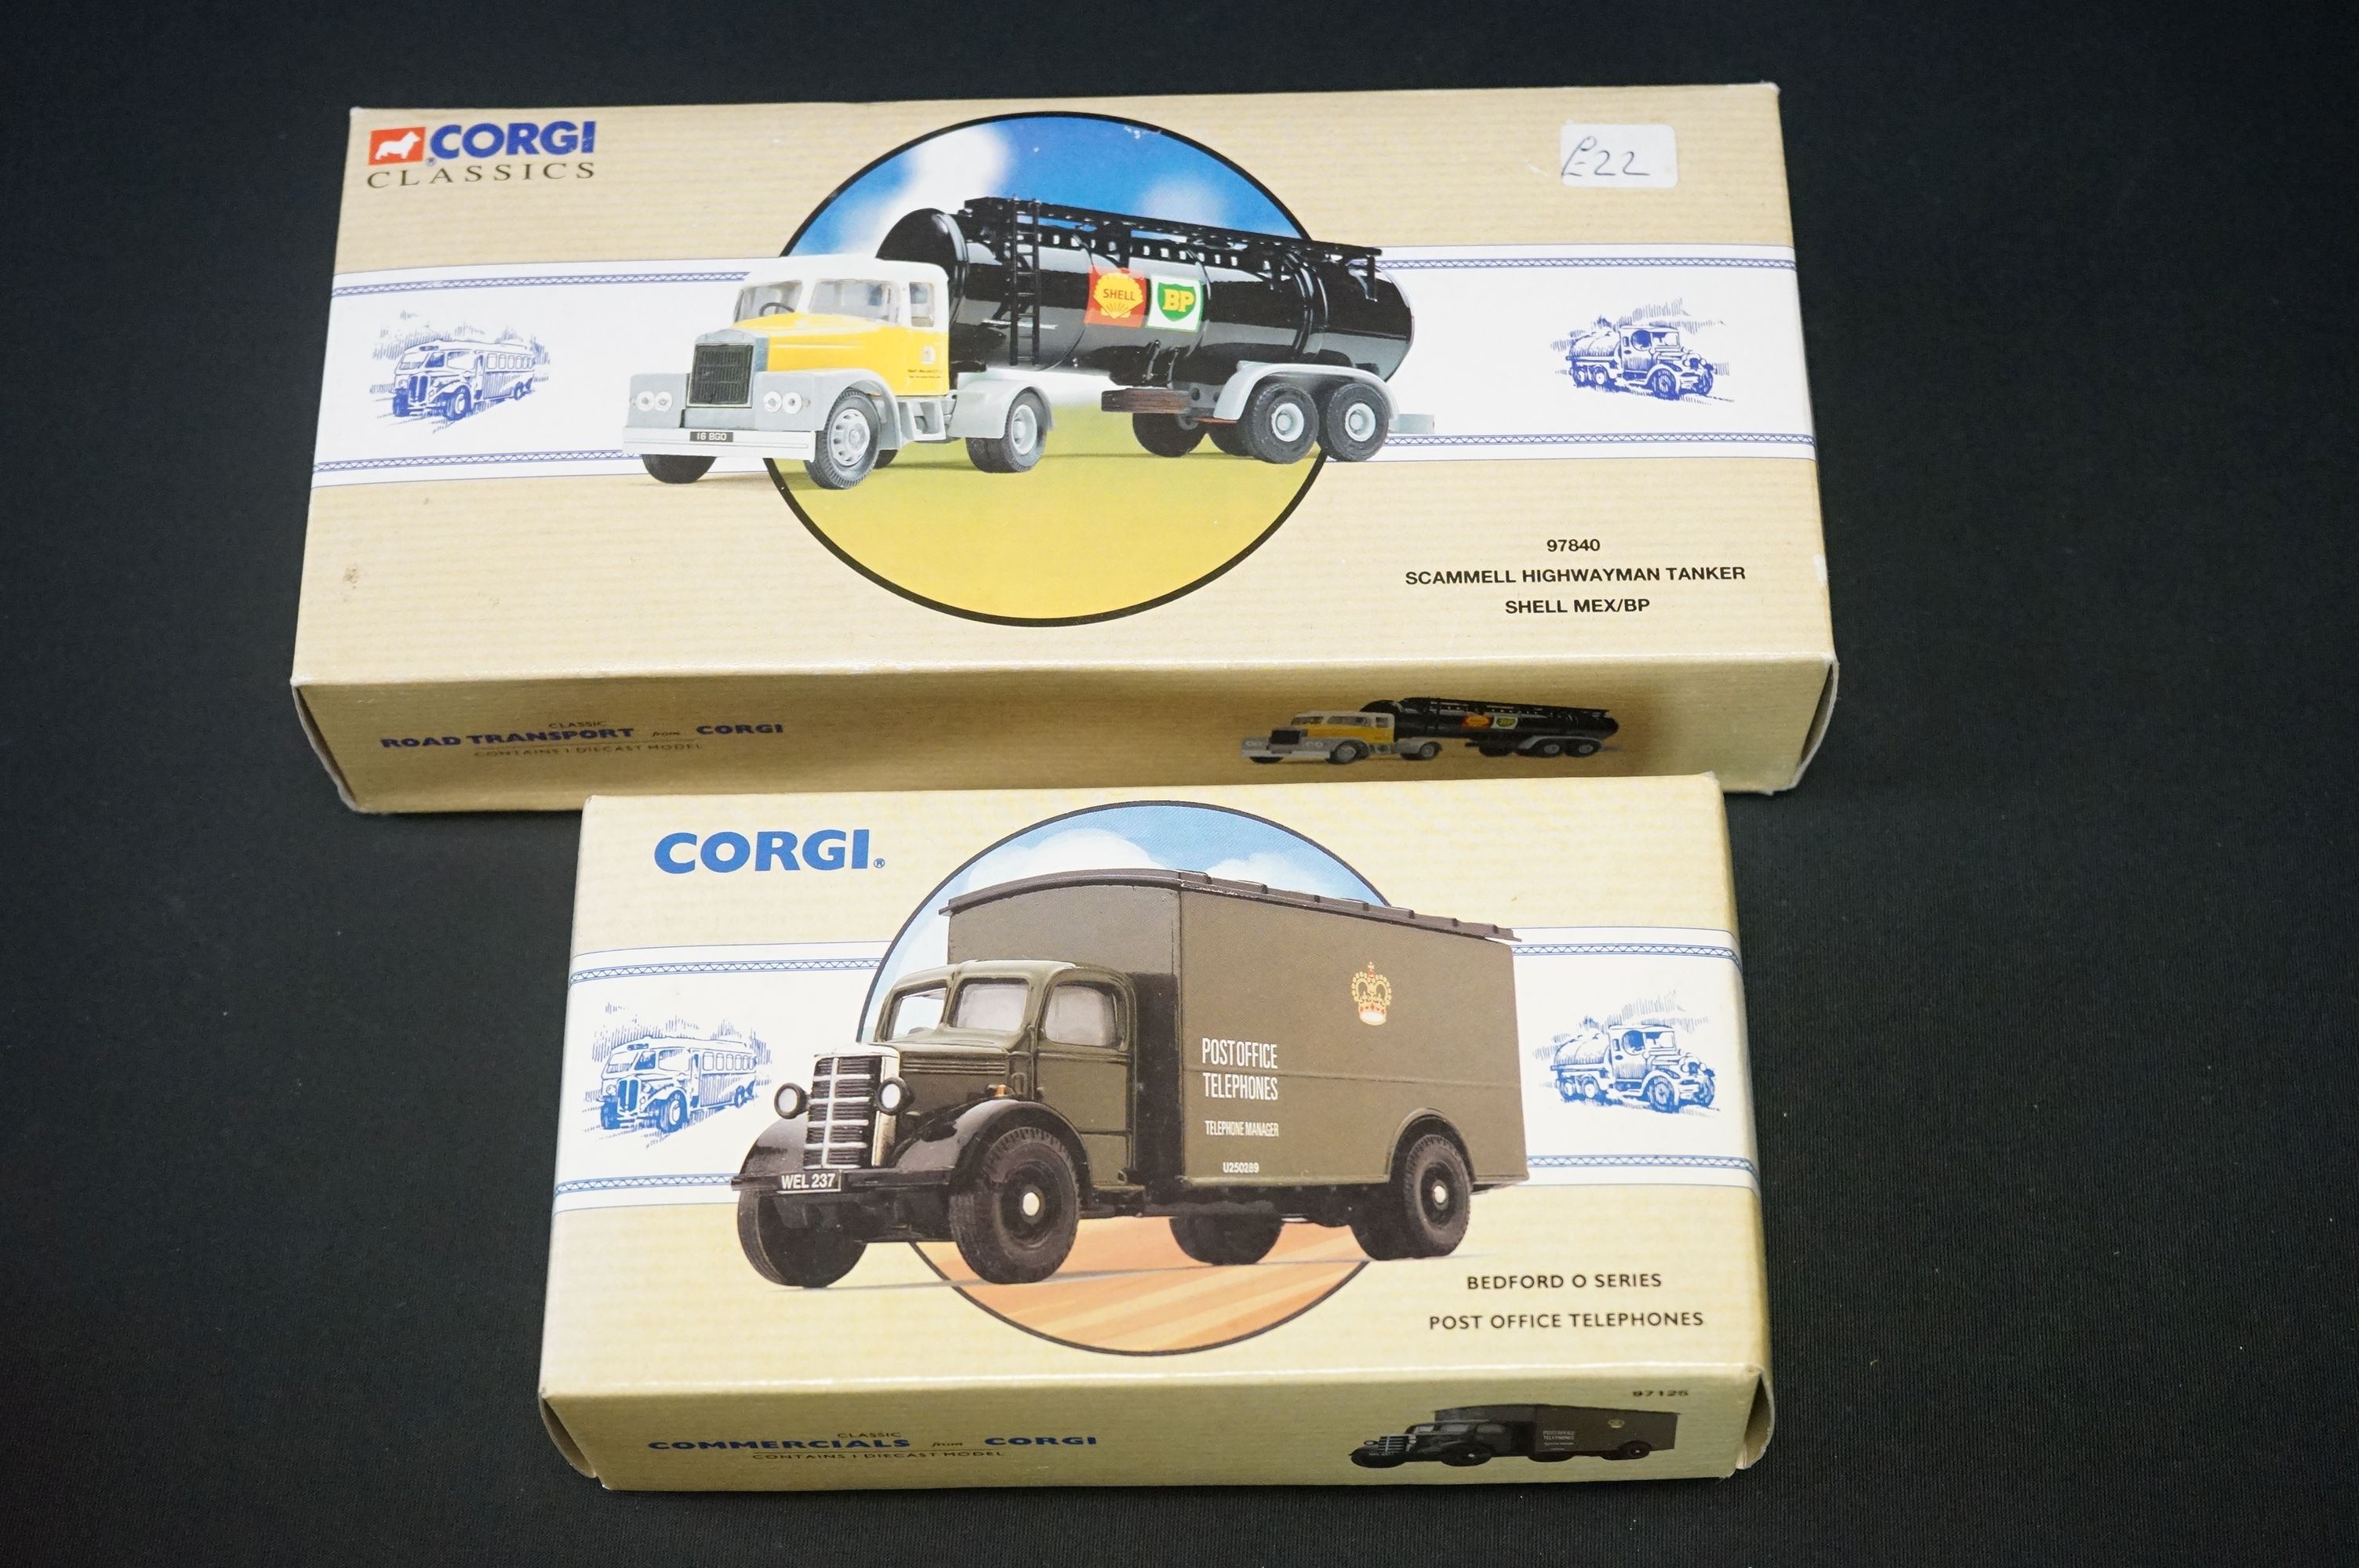 25 Boxed Corgi Classics diecast models to include 5 x Chipperfields Circus (11201 ERF KV Artic - Image 13 of 16